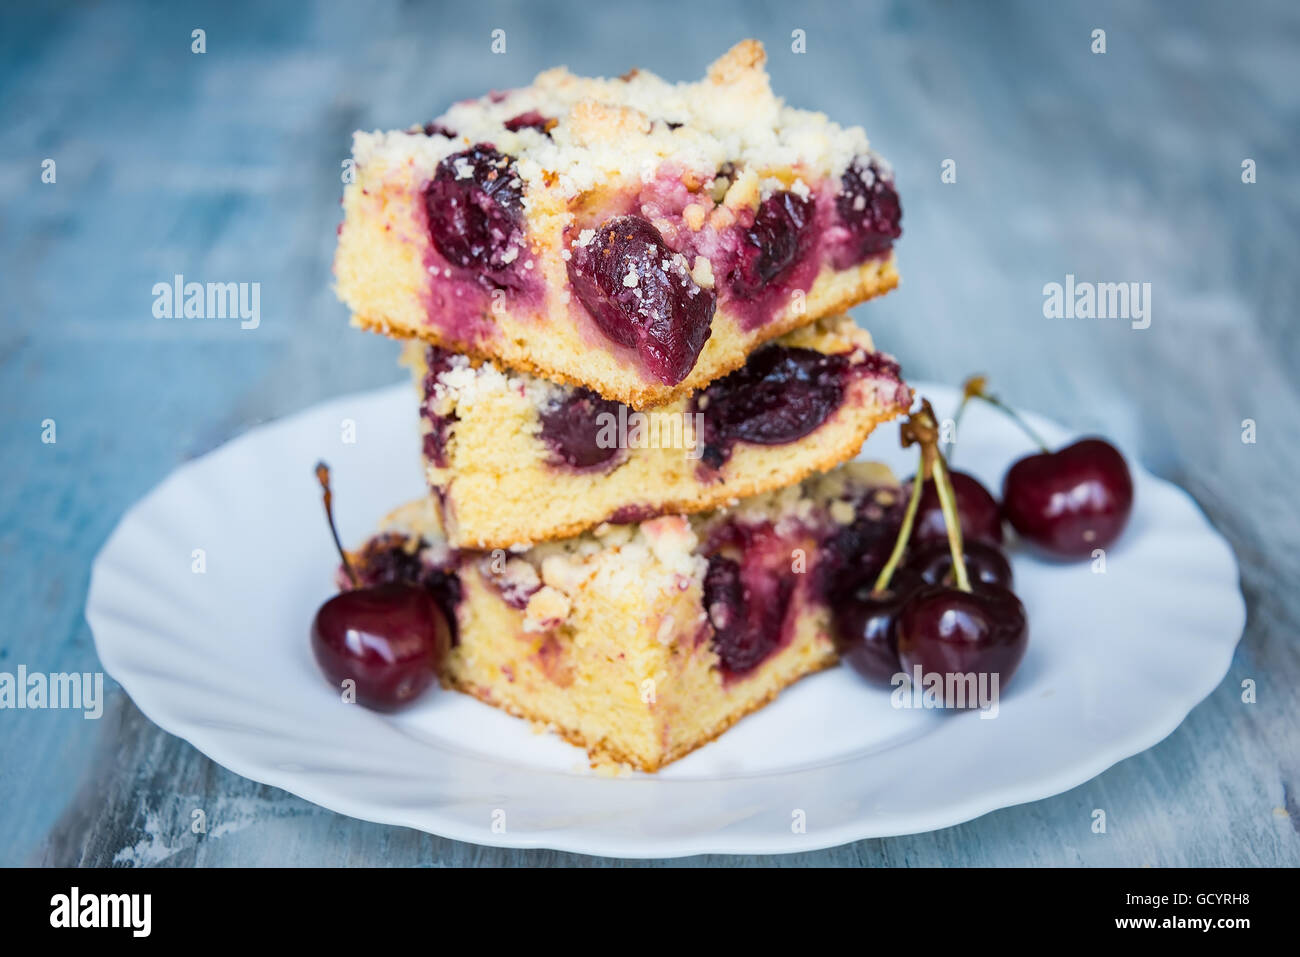 Slices of home made butter cherry cake with crumble topping Stock Photo